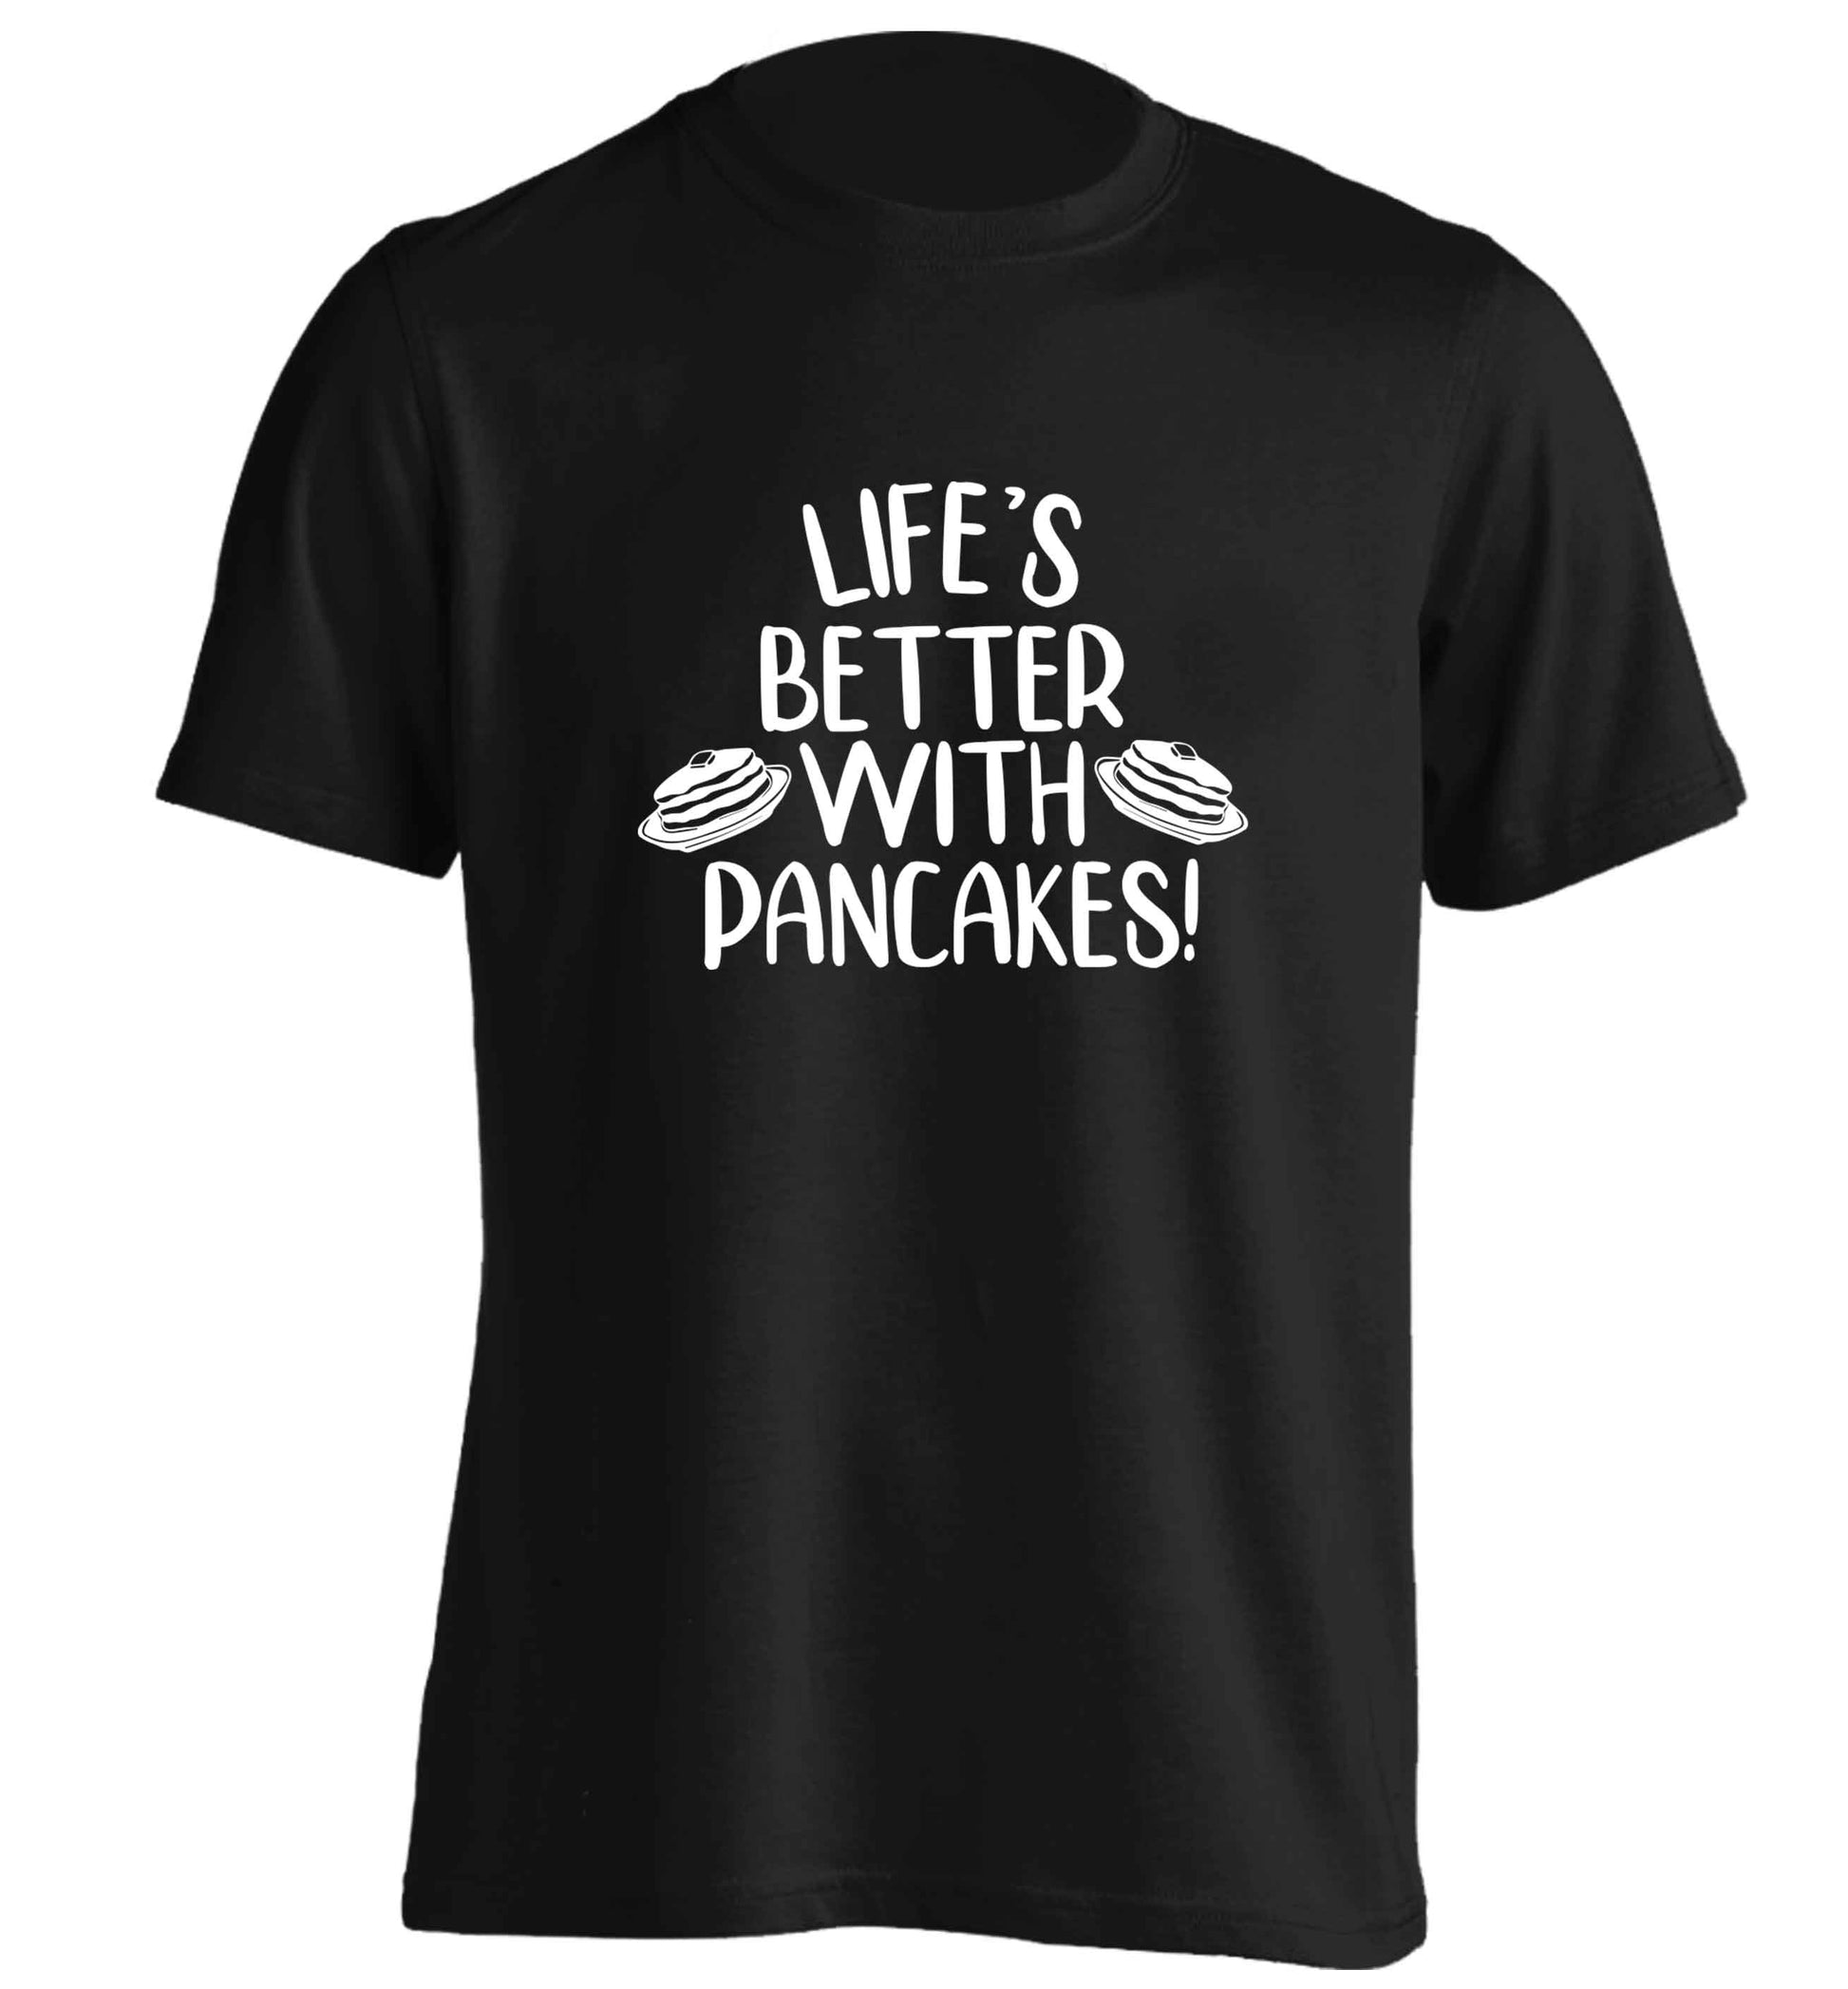 Life's better with pancakes adults unisex black Tshirt 2XL